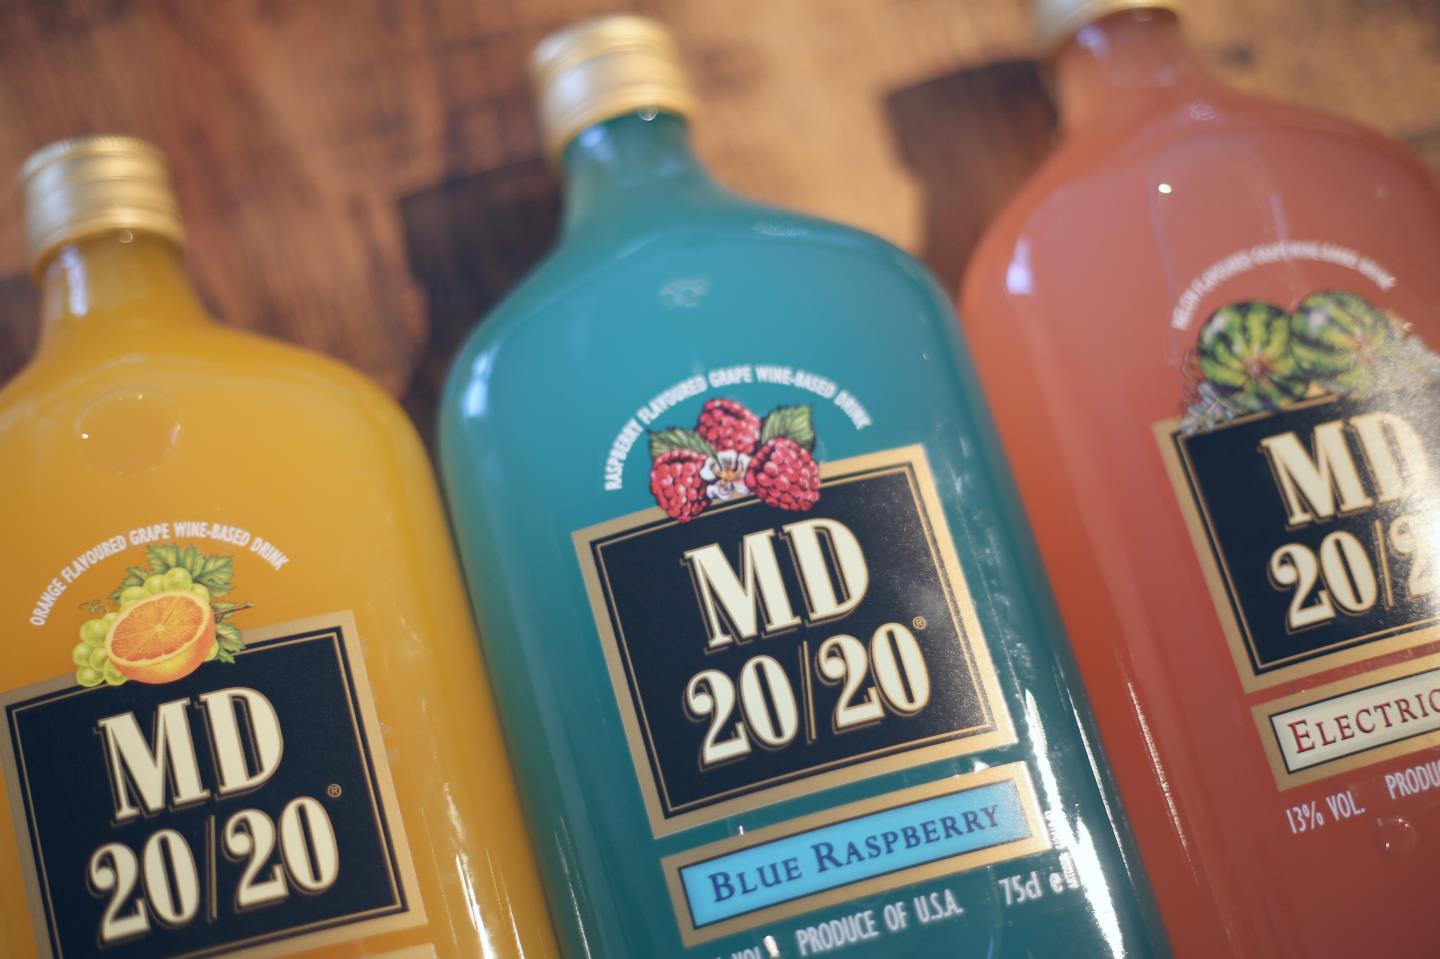 Three different flavours of MD 20/20